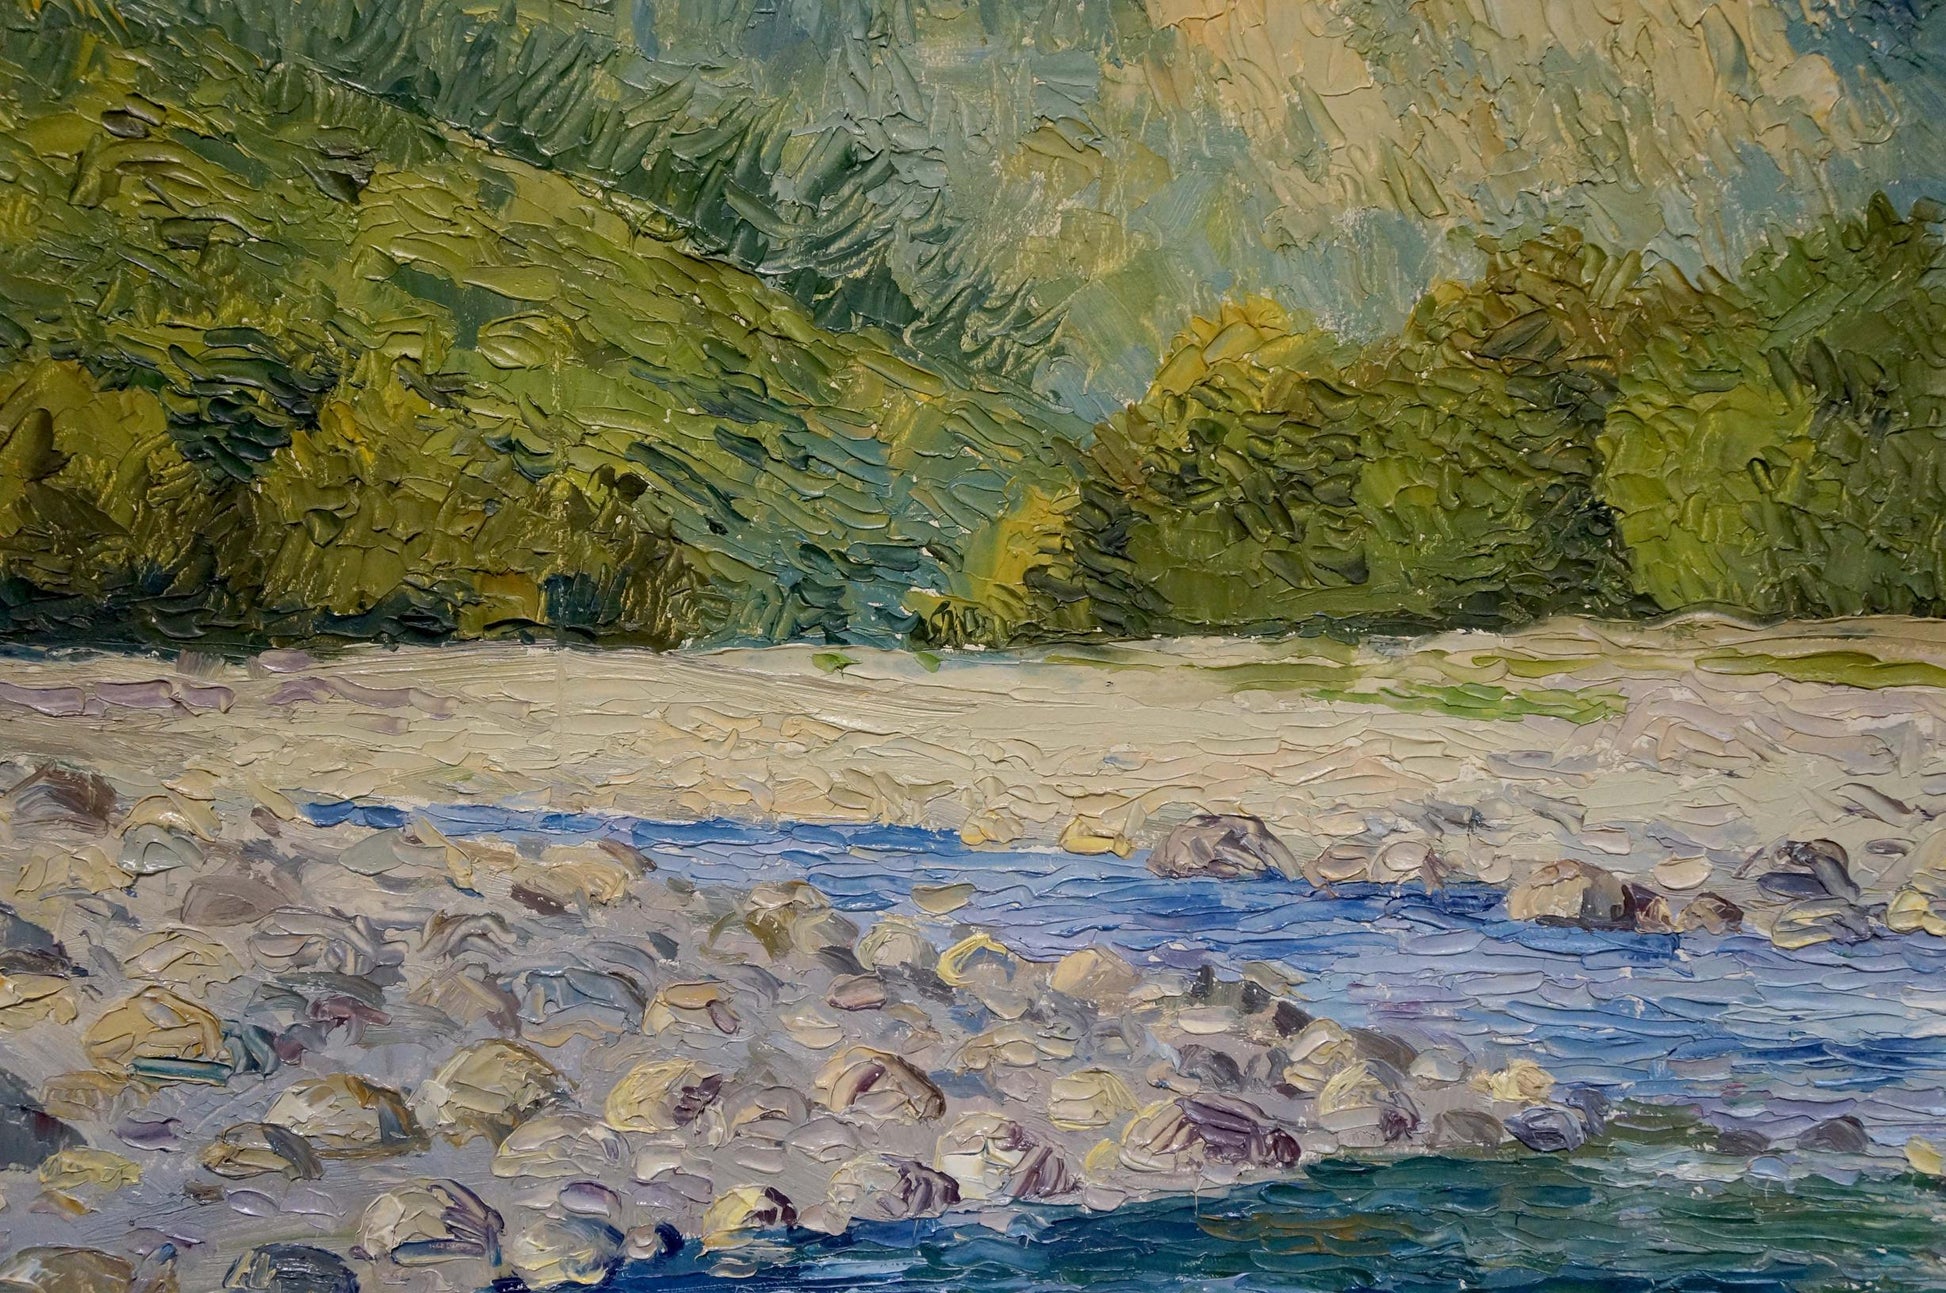 The oil painting portrays a scenic mountain creek, artist unknown